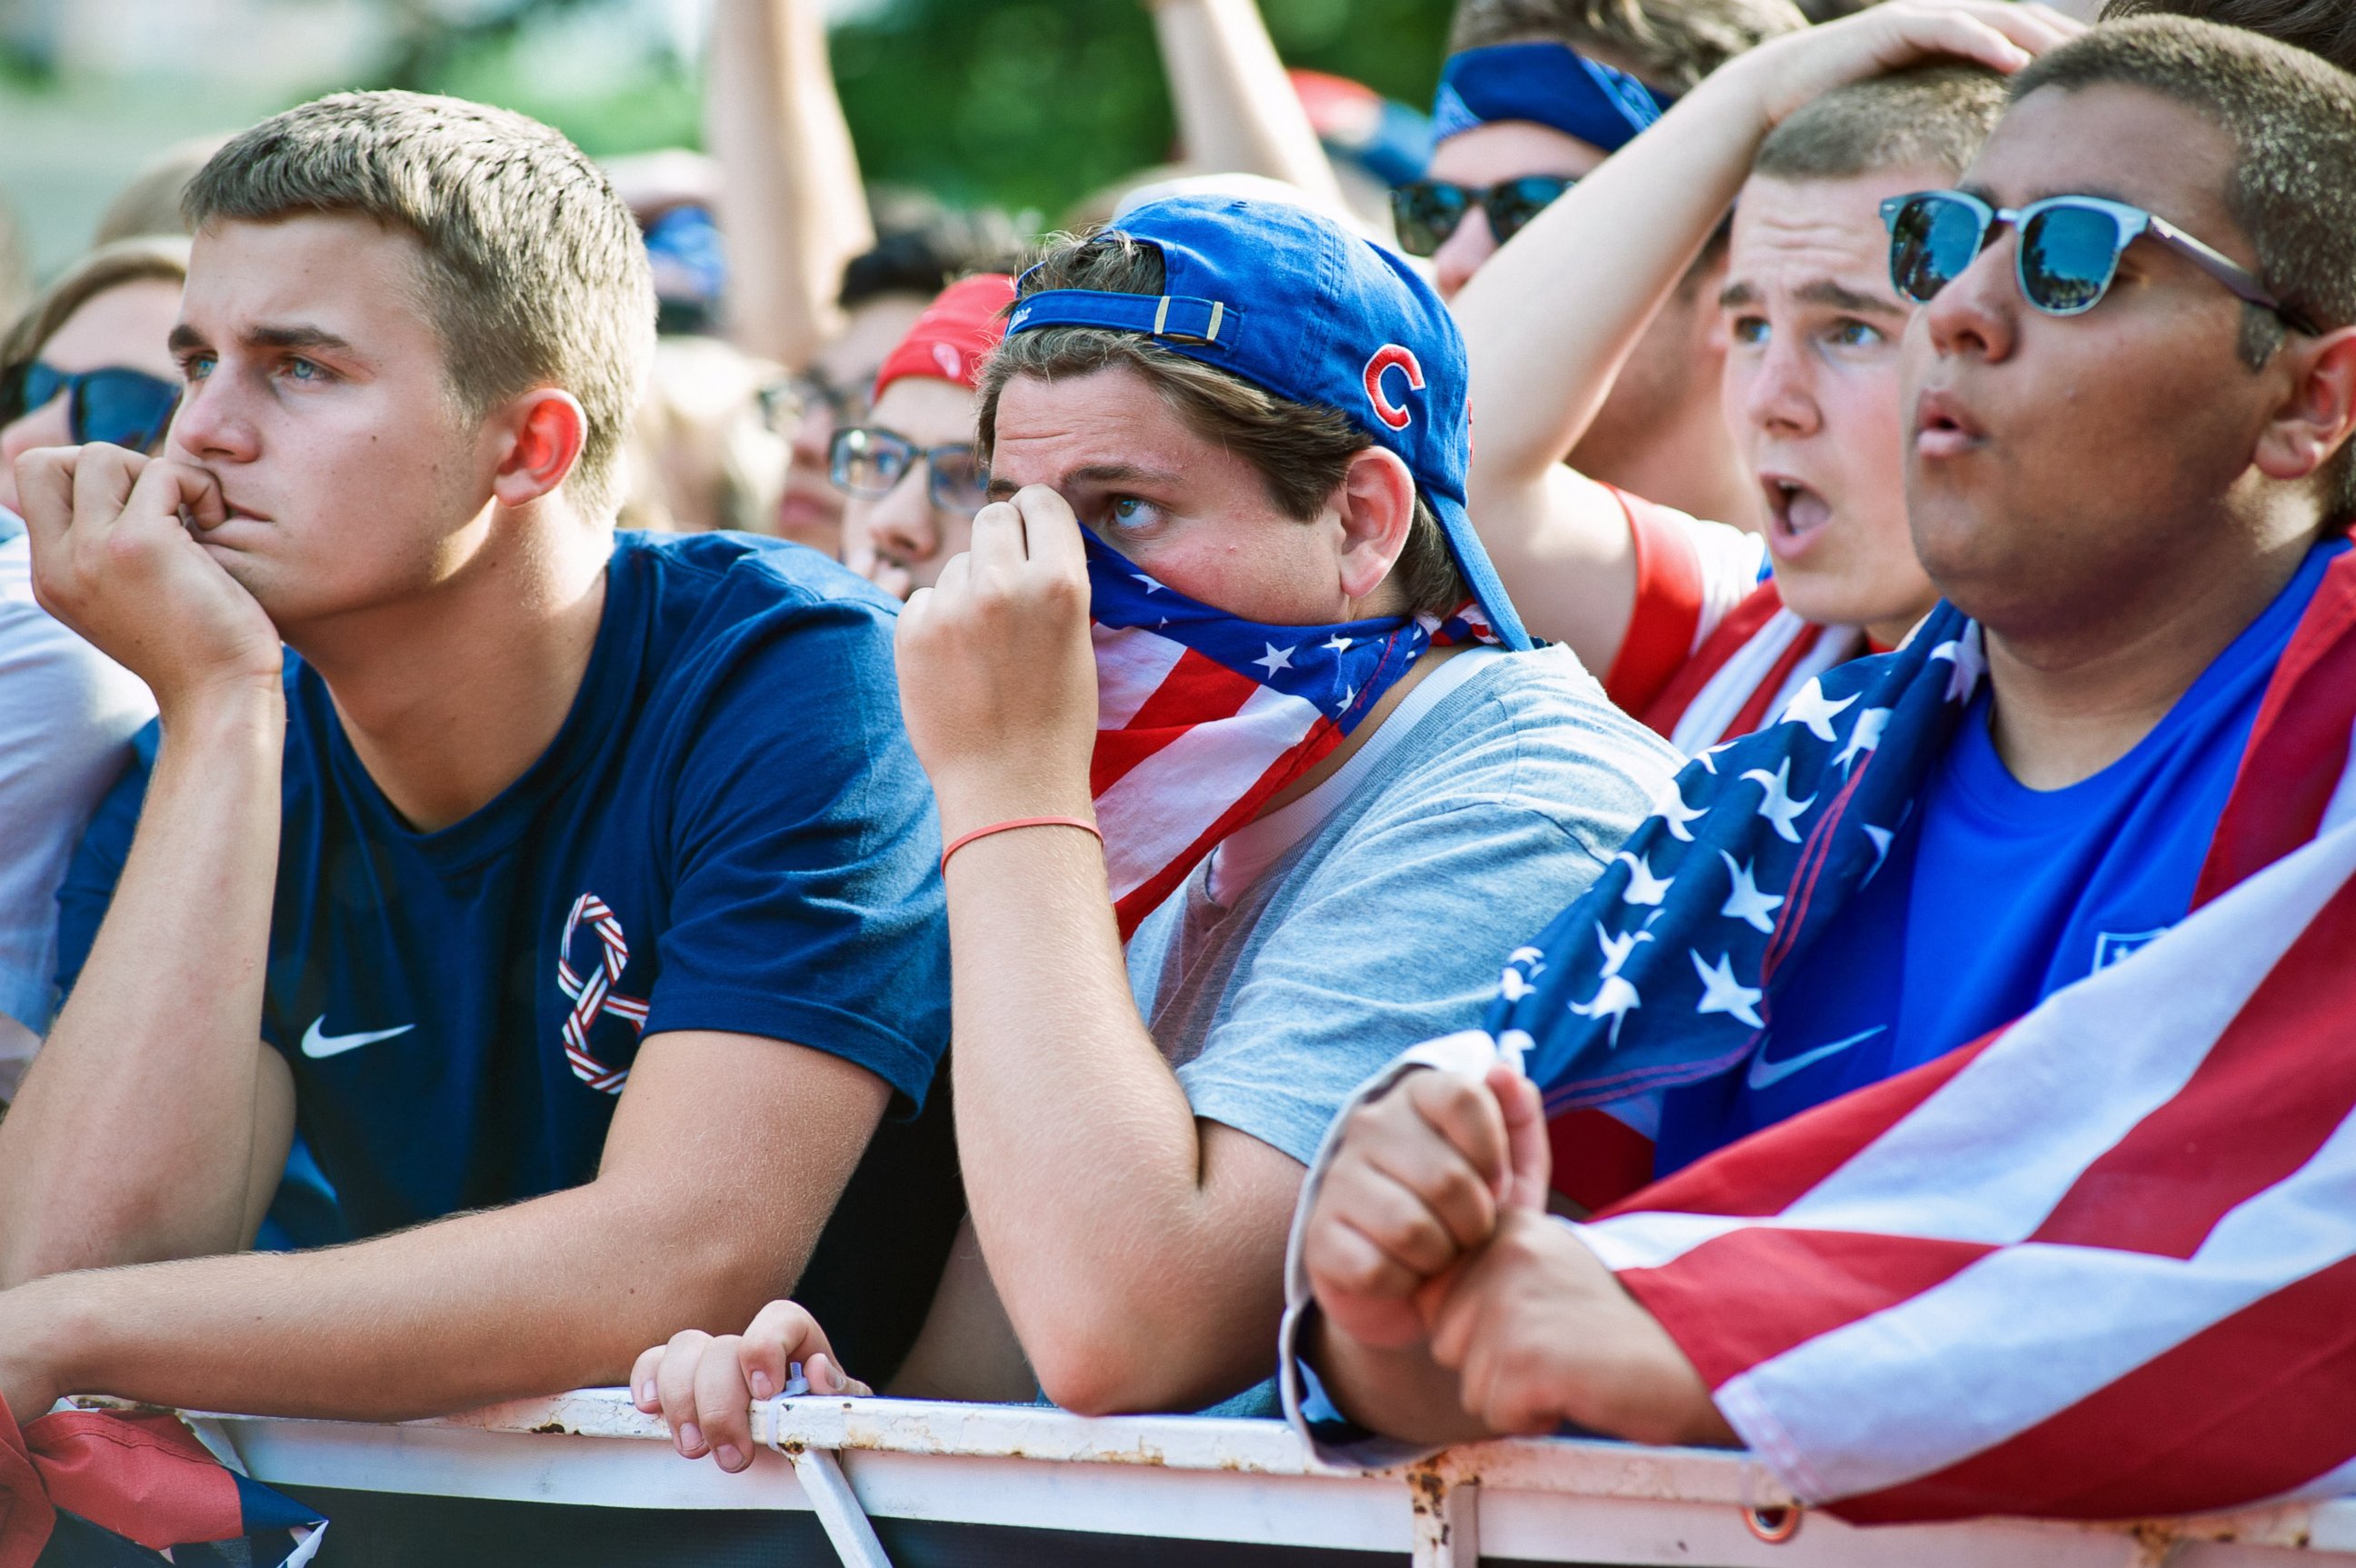 PHOTO: Fans gather in Grant Park to watch the United States tie Portugal in a Group G World Cup match on June 22, 2014 in Chicago, Illinois.